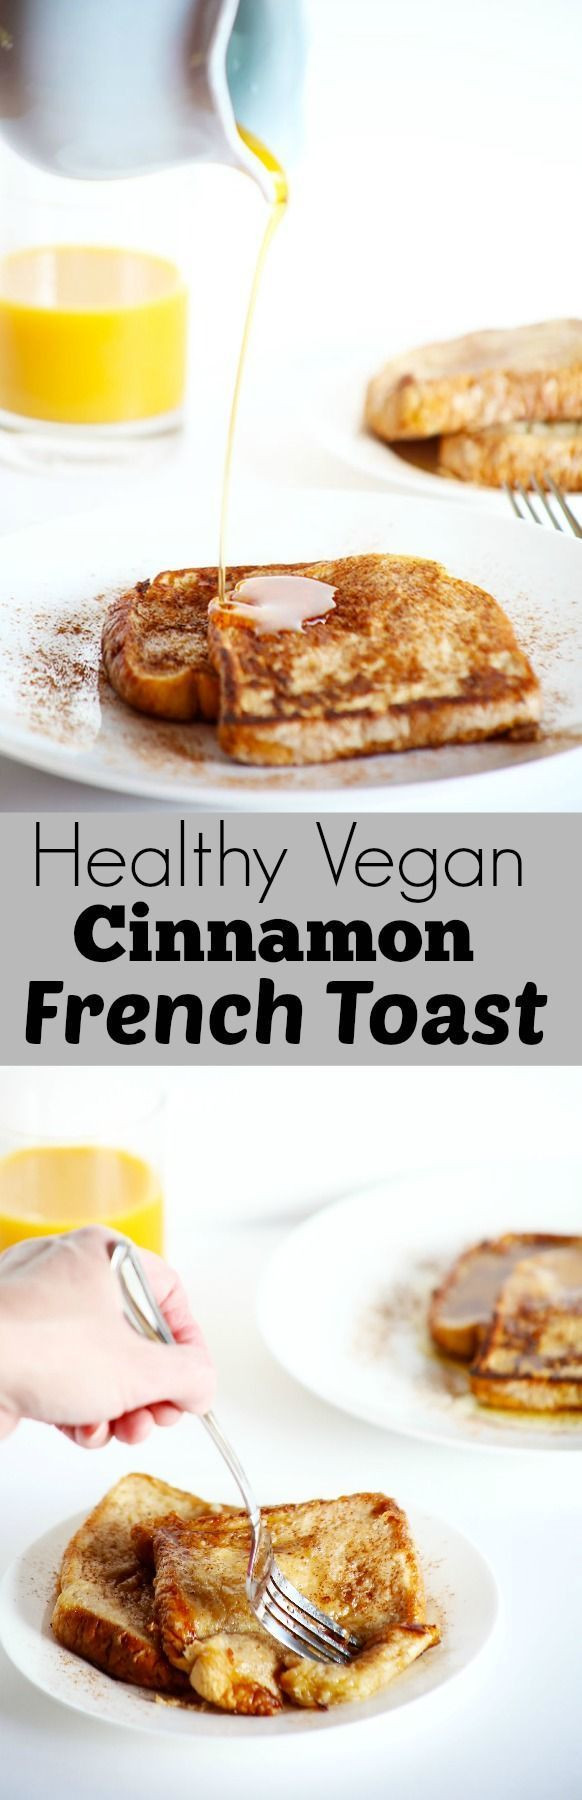 Healthy Vegan Recipes For Weight Loss
 Healthy Vegan Cinnamon French Toast Recipe